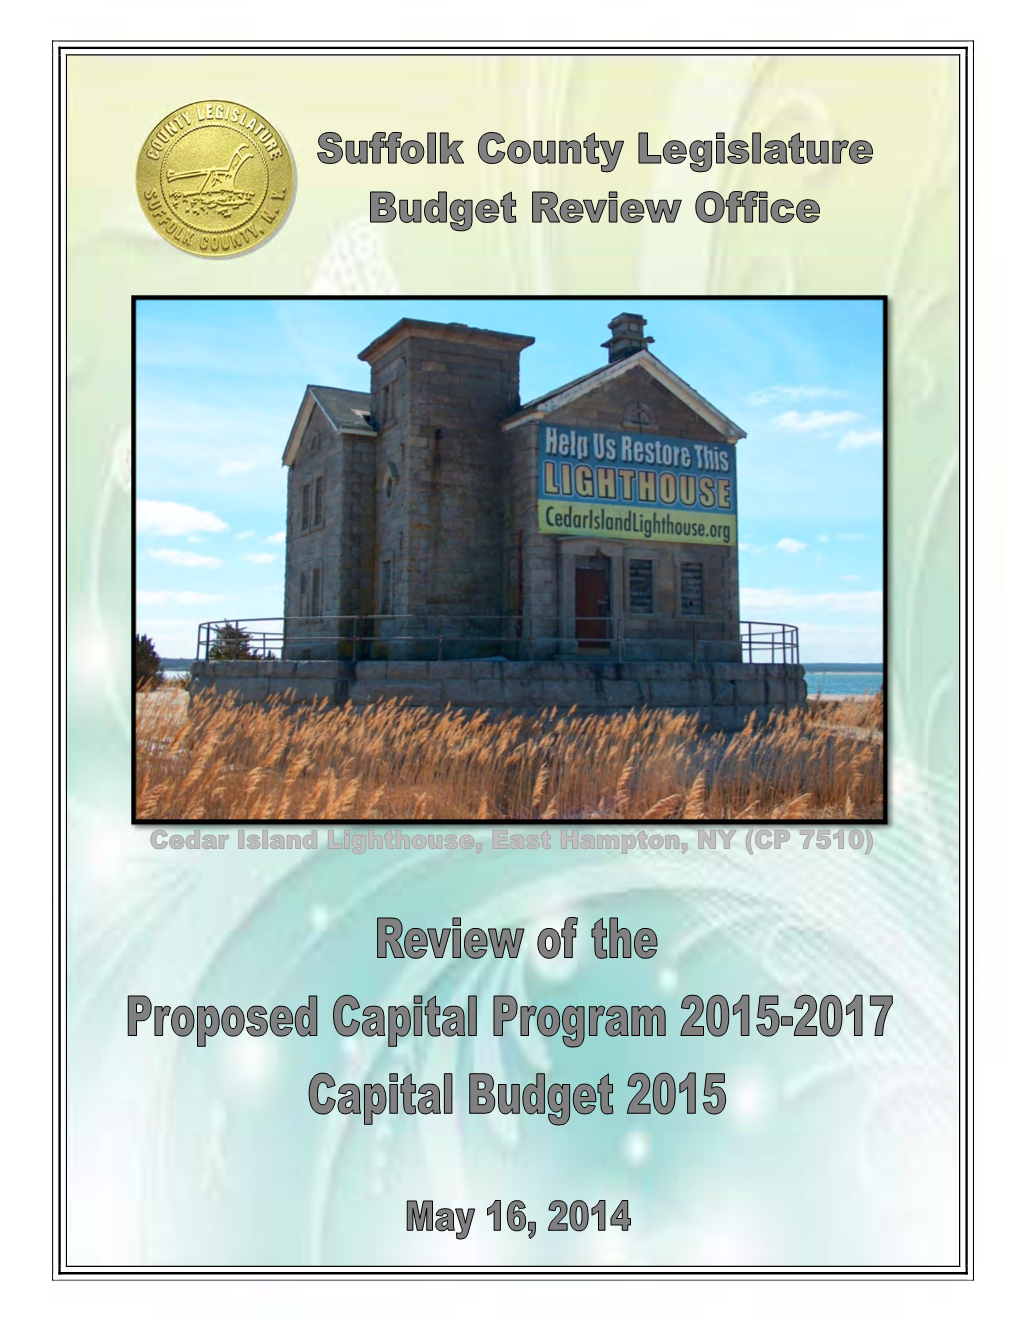 Review of the Proposed Capital Program 2015-2017 Capital Budget 2015